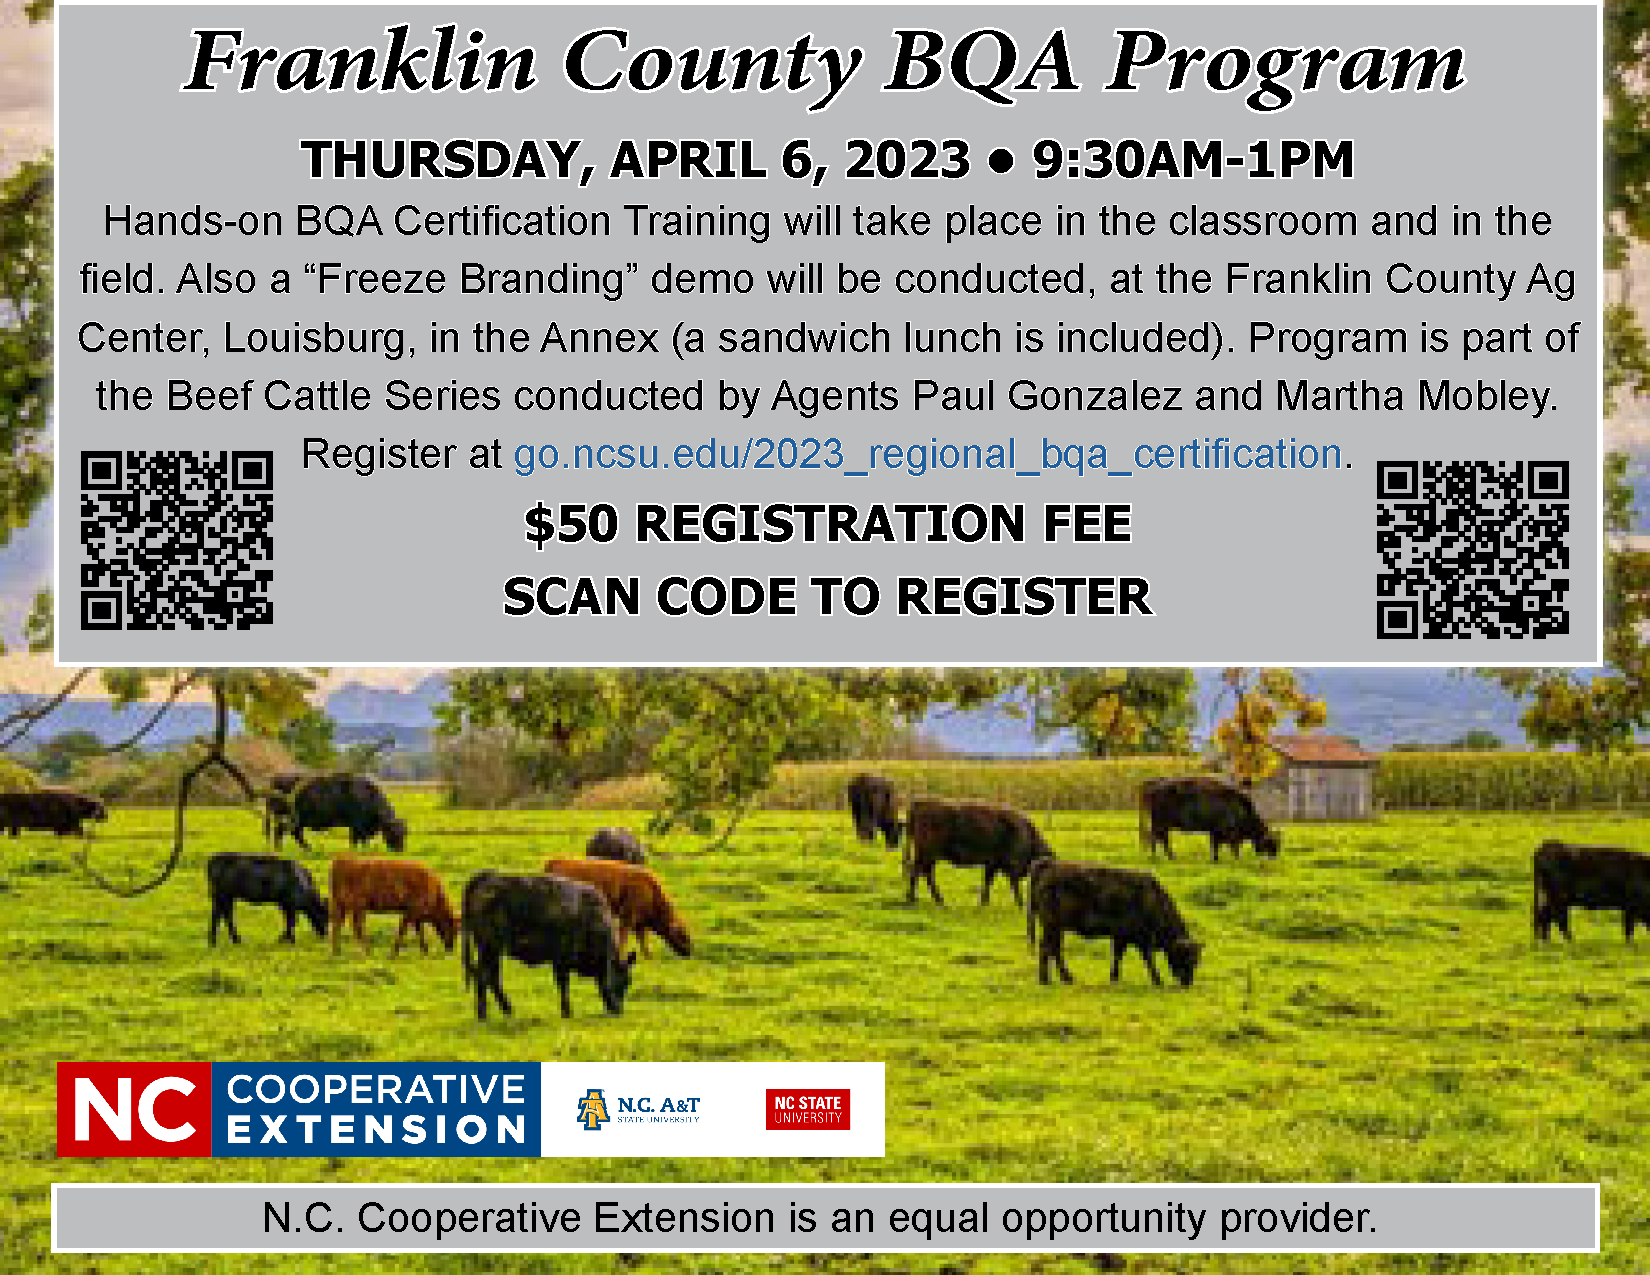 Franklin County BQA Program flyer Thursday, April 6 and registration info., flyer with cows in pasture background.